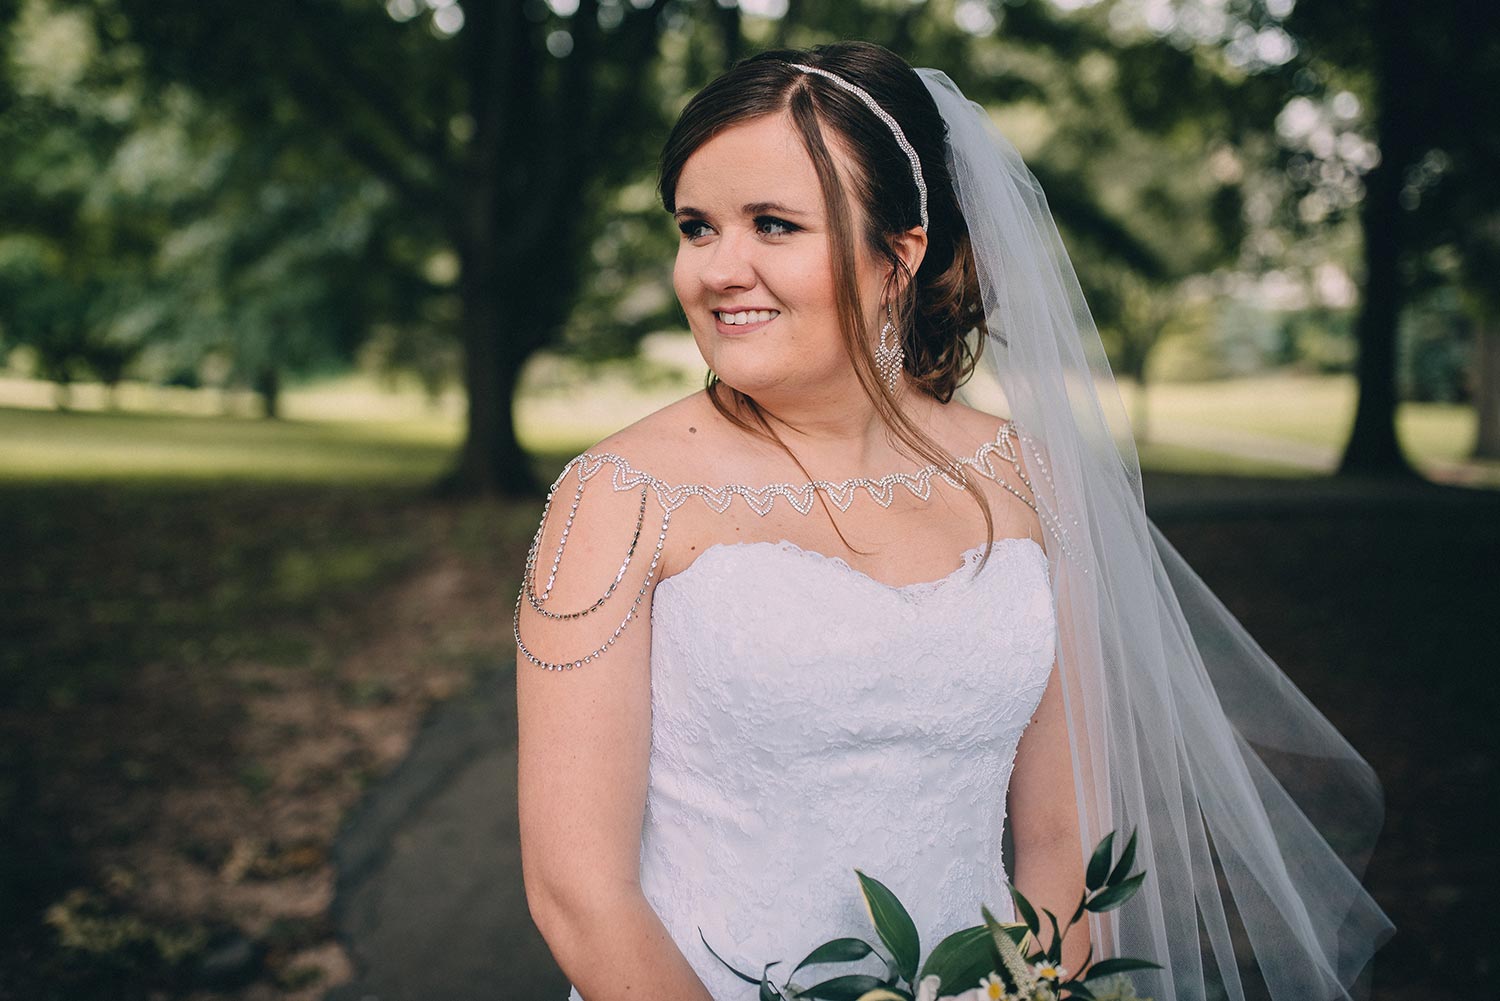 Ashley in white wedding dress with custom crystal shoulder necklace